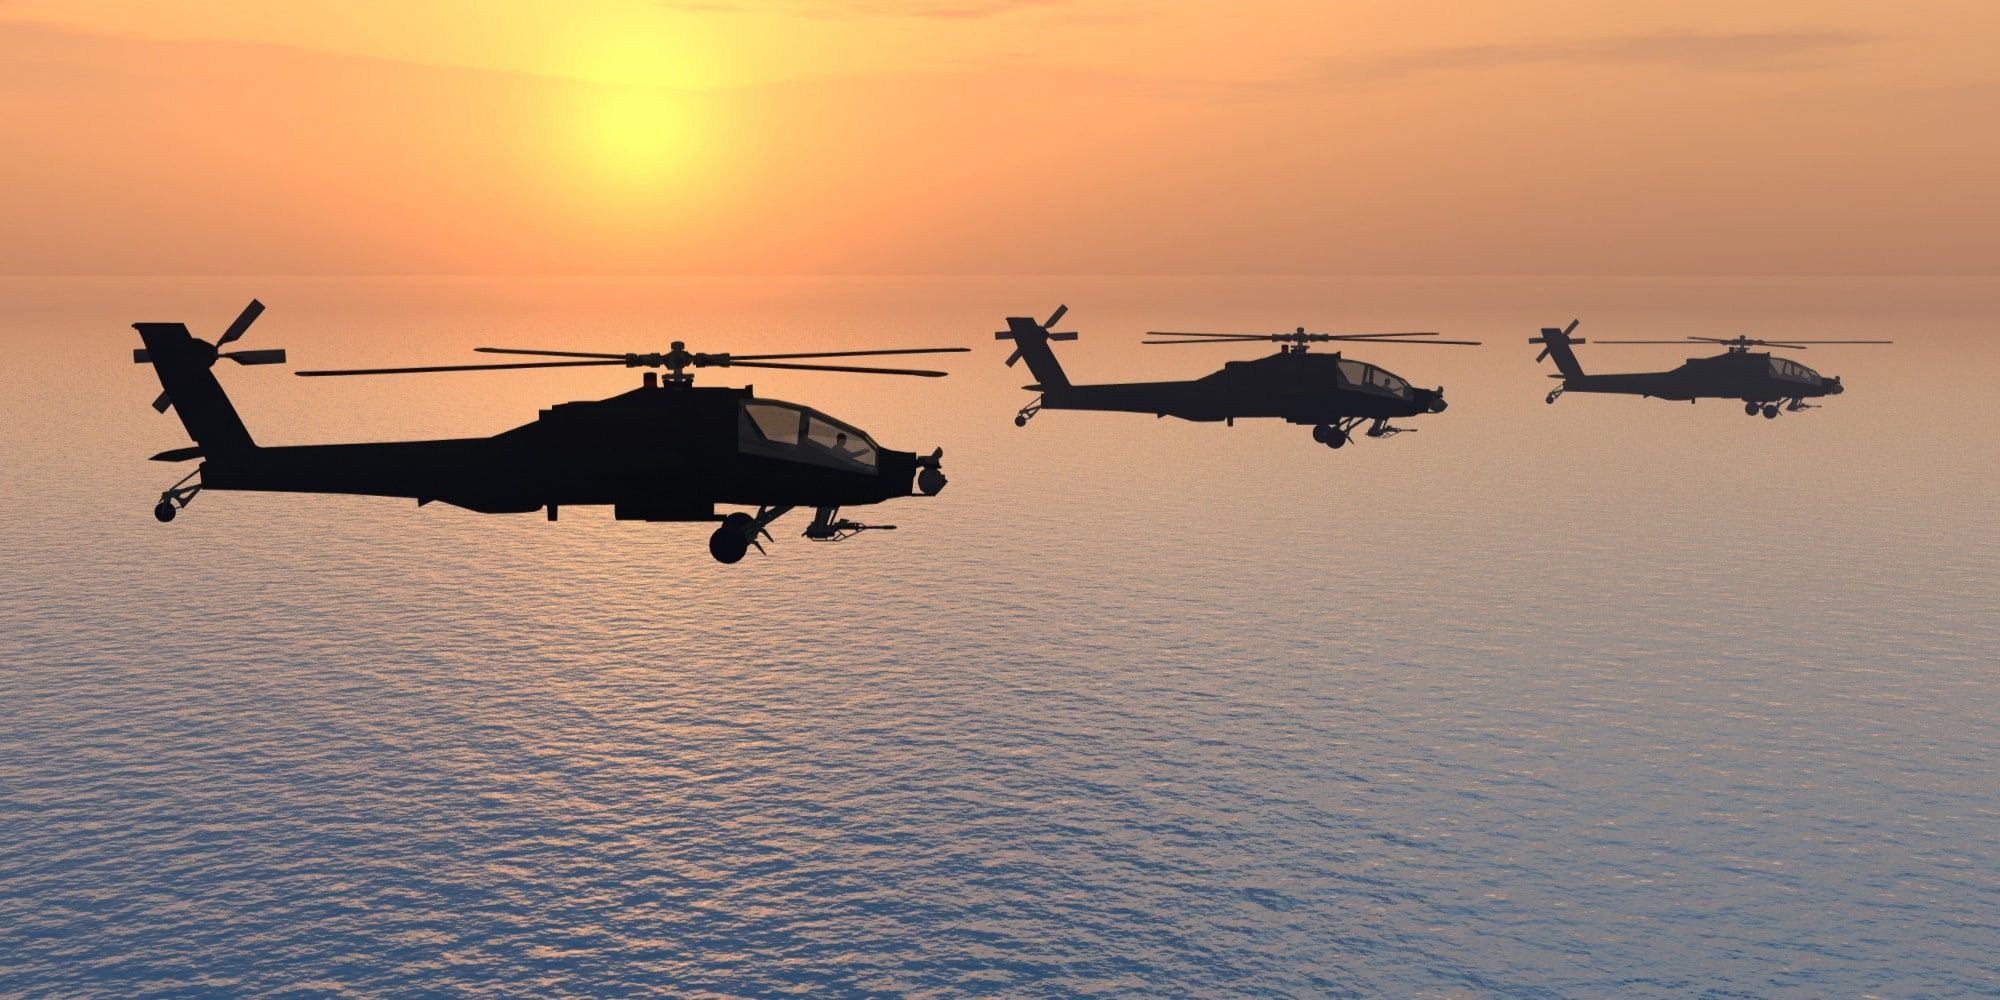 Apache helicopters in formation